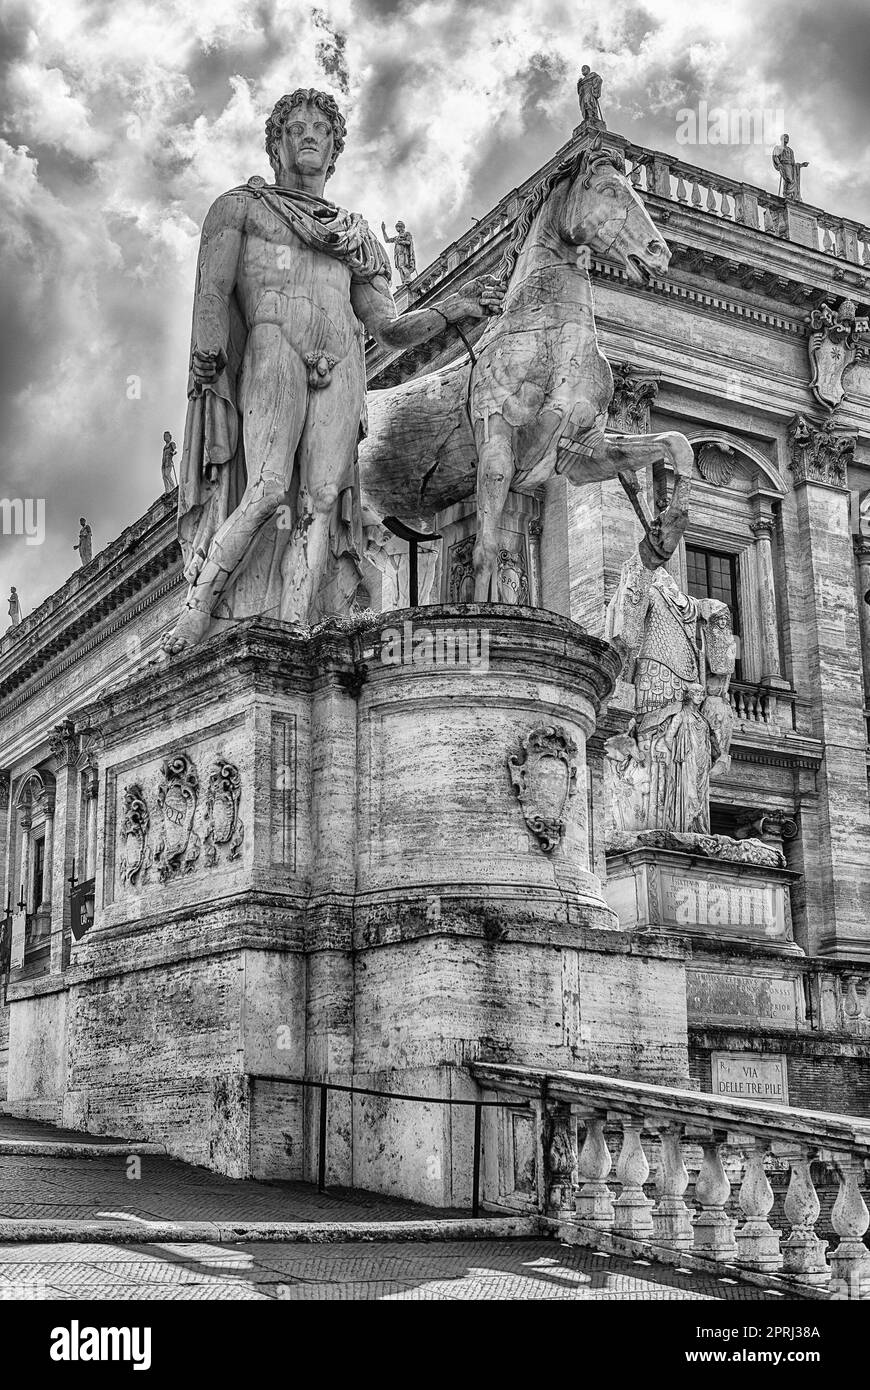 Equestrian statue of Pollux on Capitol. Rome. Italy Stock Photo